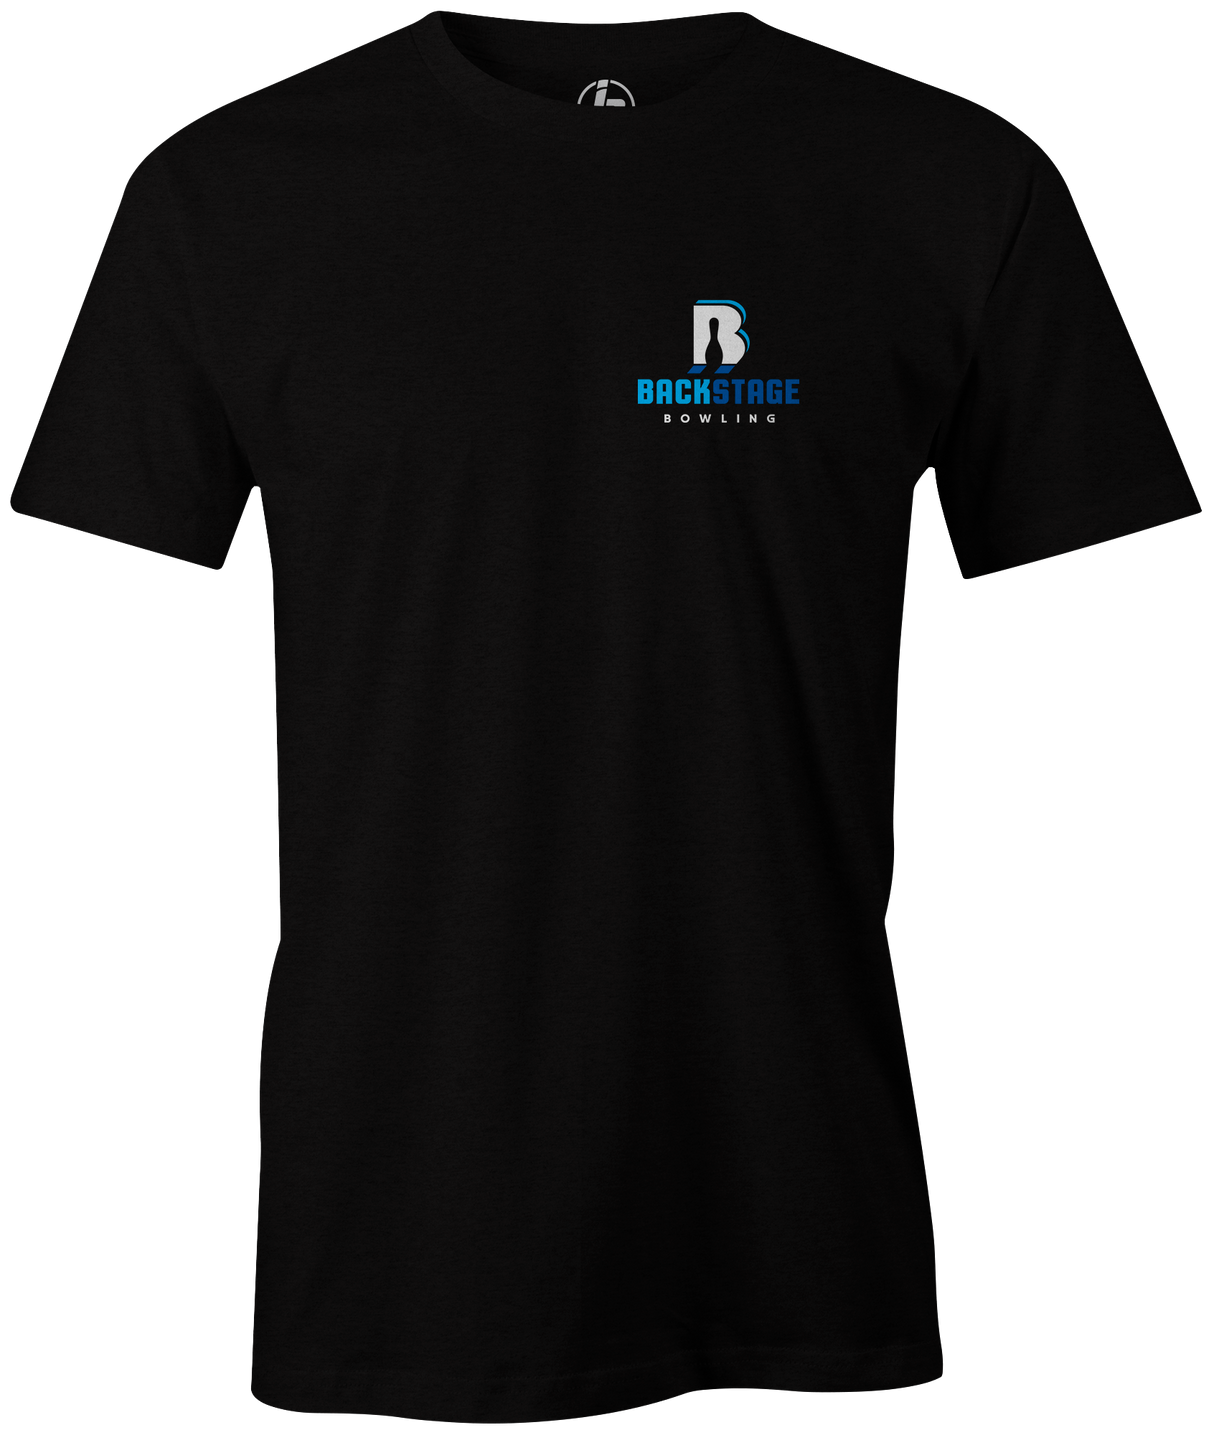 Backstage Bowling T-shirt, men's, black, tee, tee-shirt, t shirt, apparel, merch, practice, lanes, free shipping, discount, cheap, coupon, shannon o'keefe, bryan o'keefe, mike jasnau, mike shady, coaching, membership, cool, vintage, authentic, original